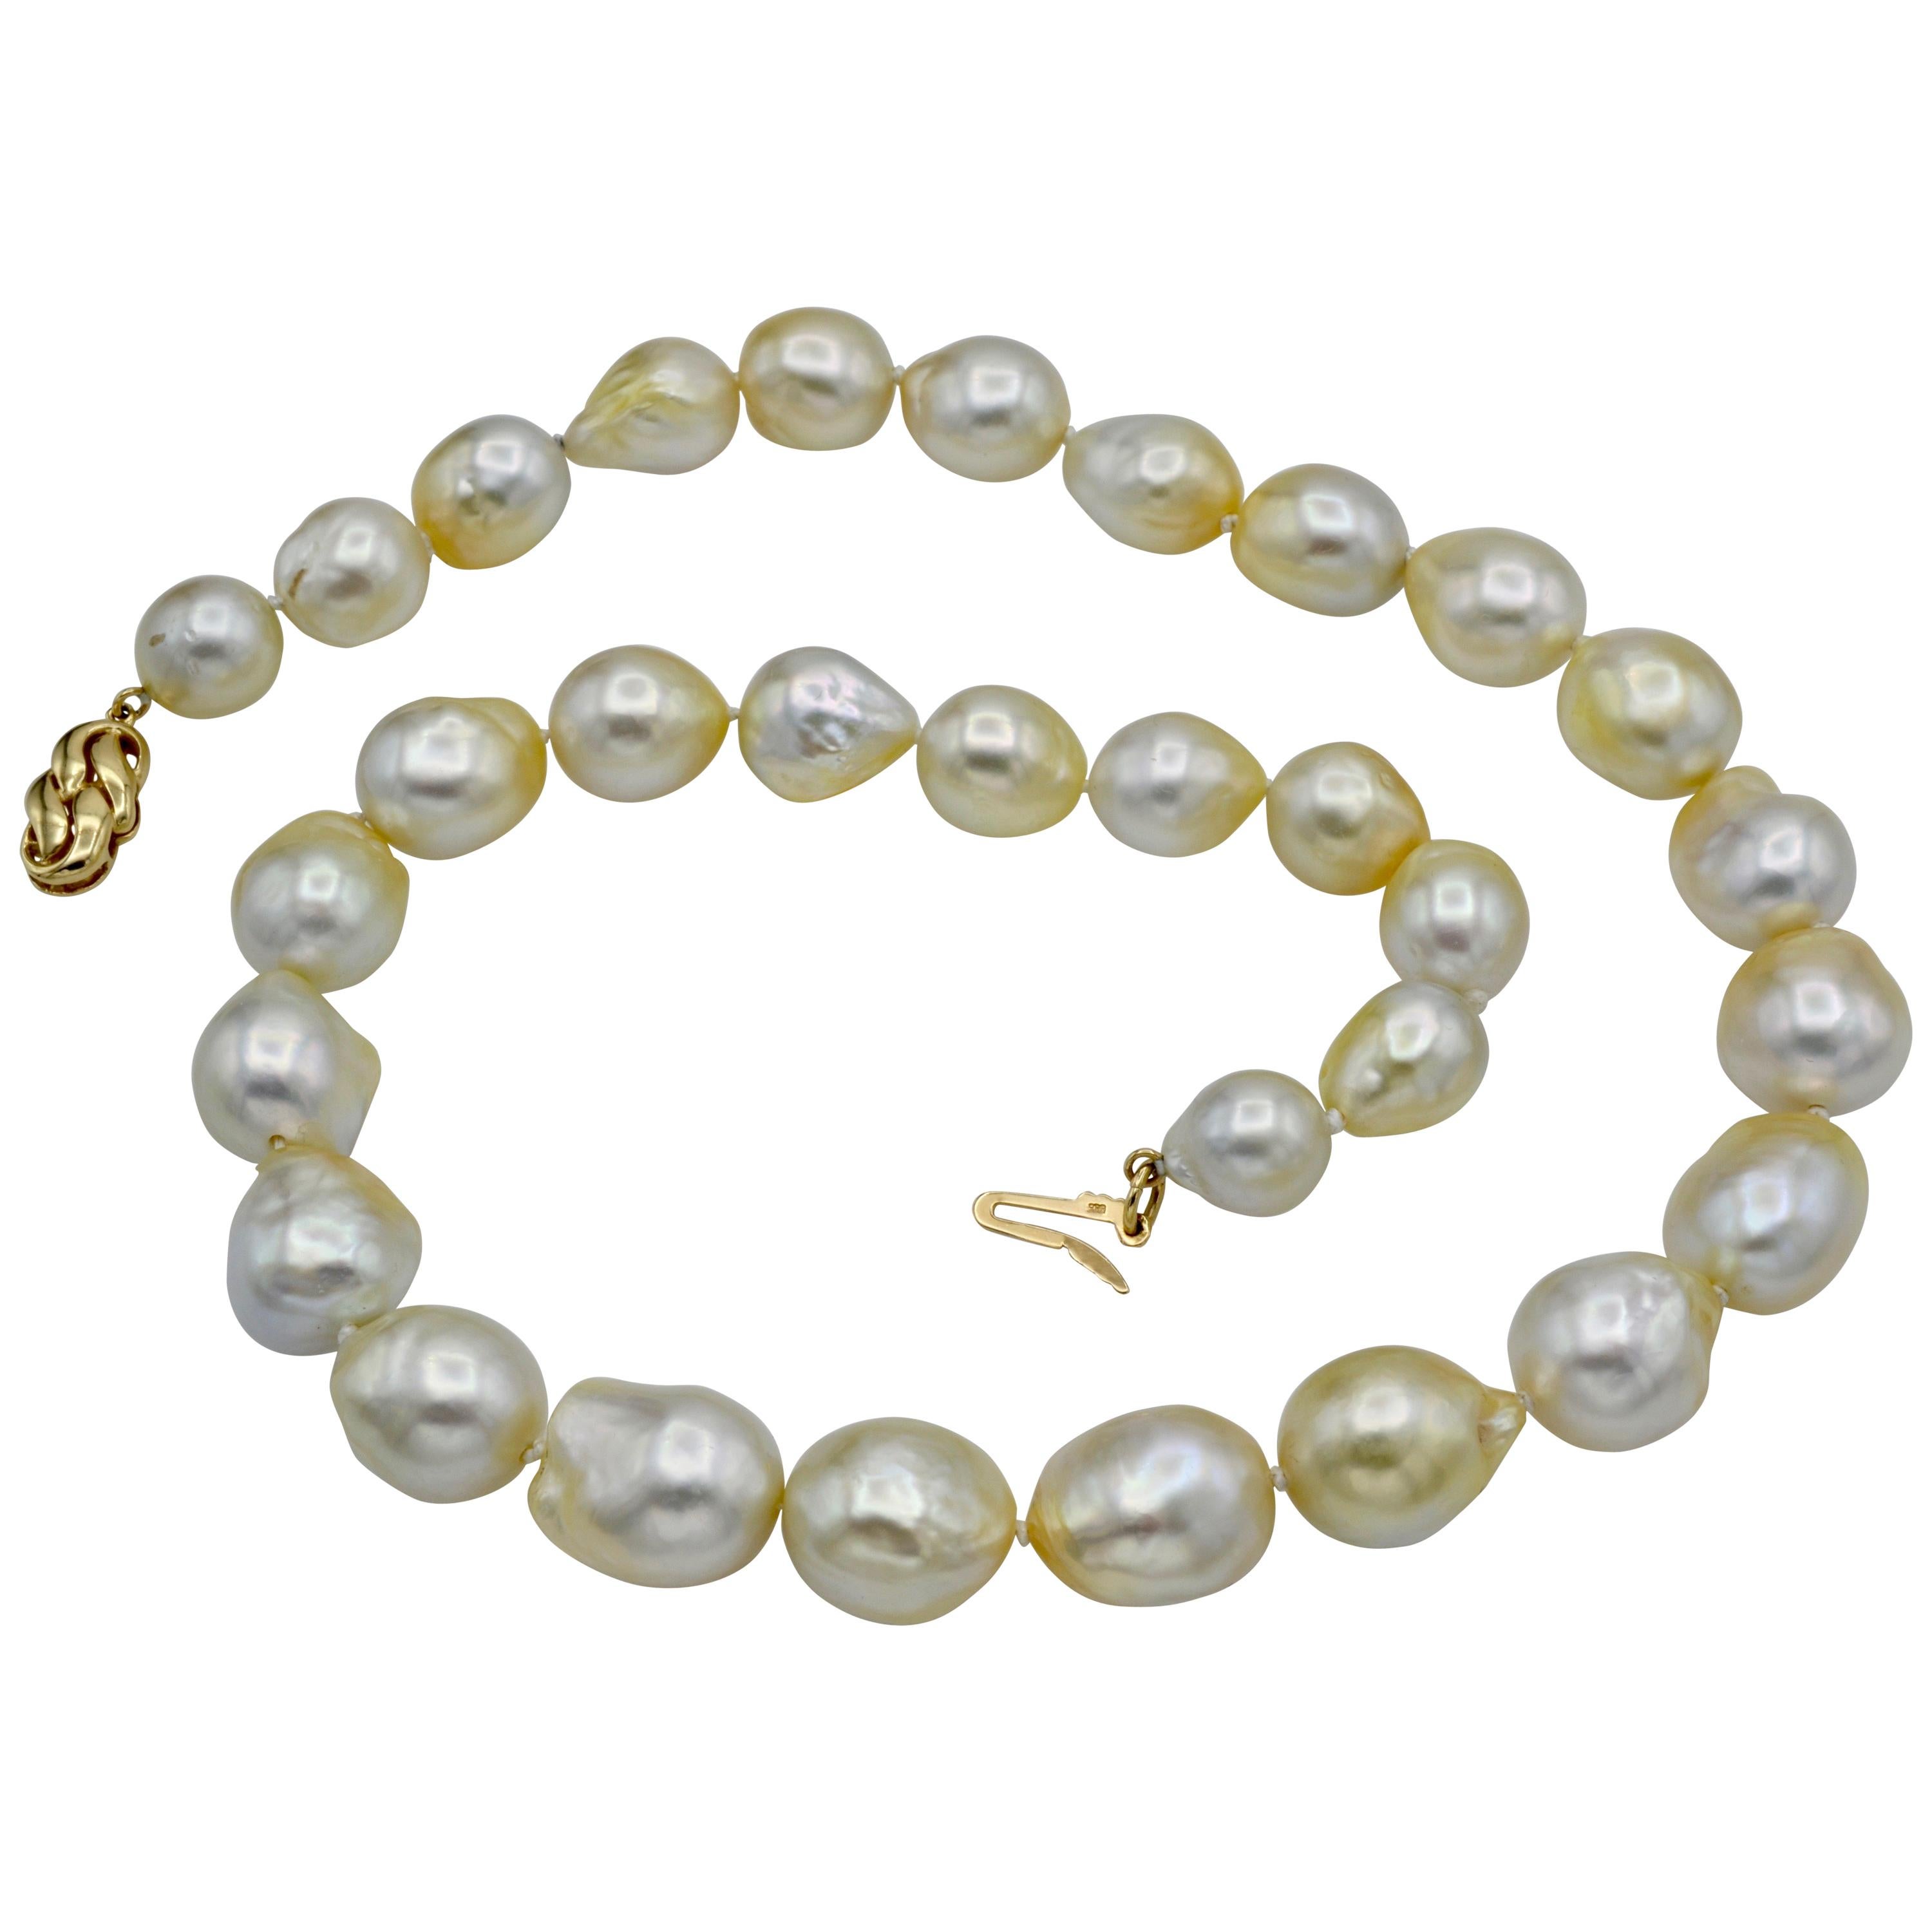 South Sea Pearl White Baroque Necklace 14 Karat Gold